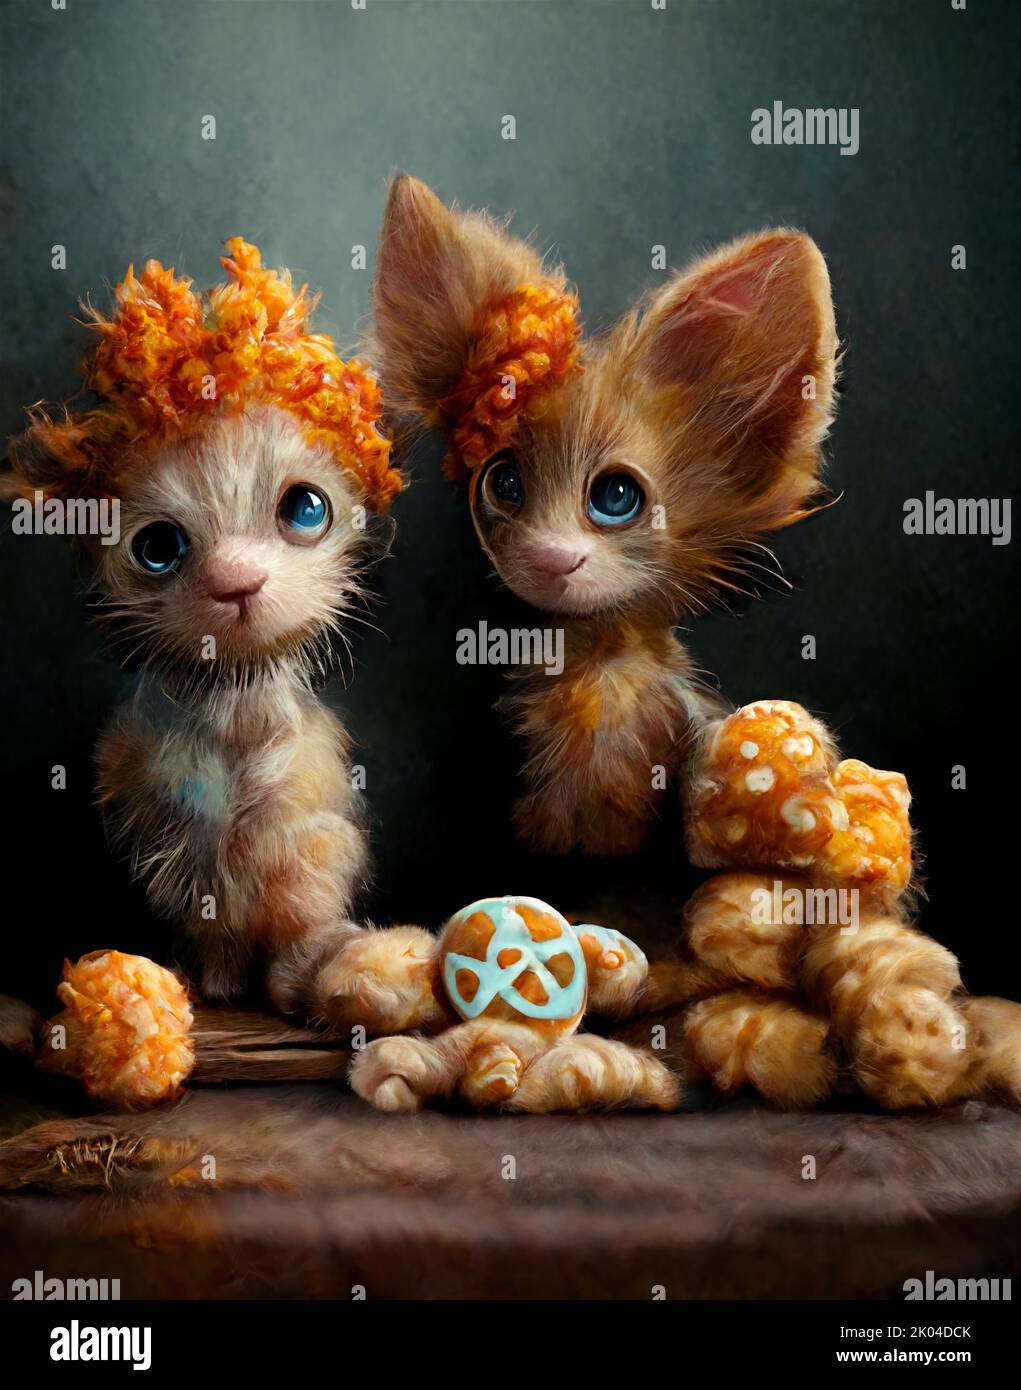 Two cute ginger cats, abstract background picture Stock Photo